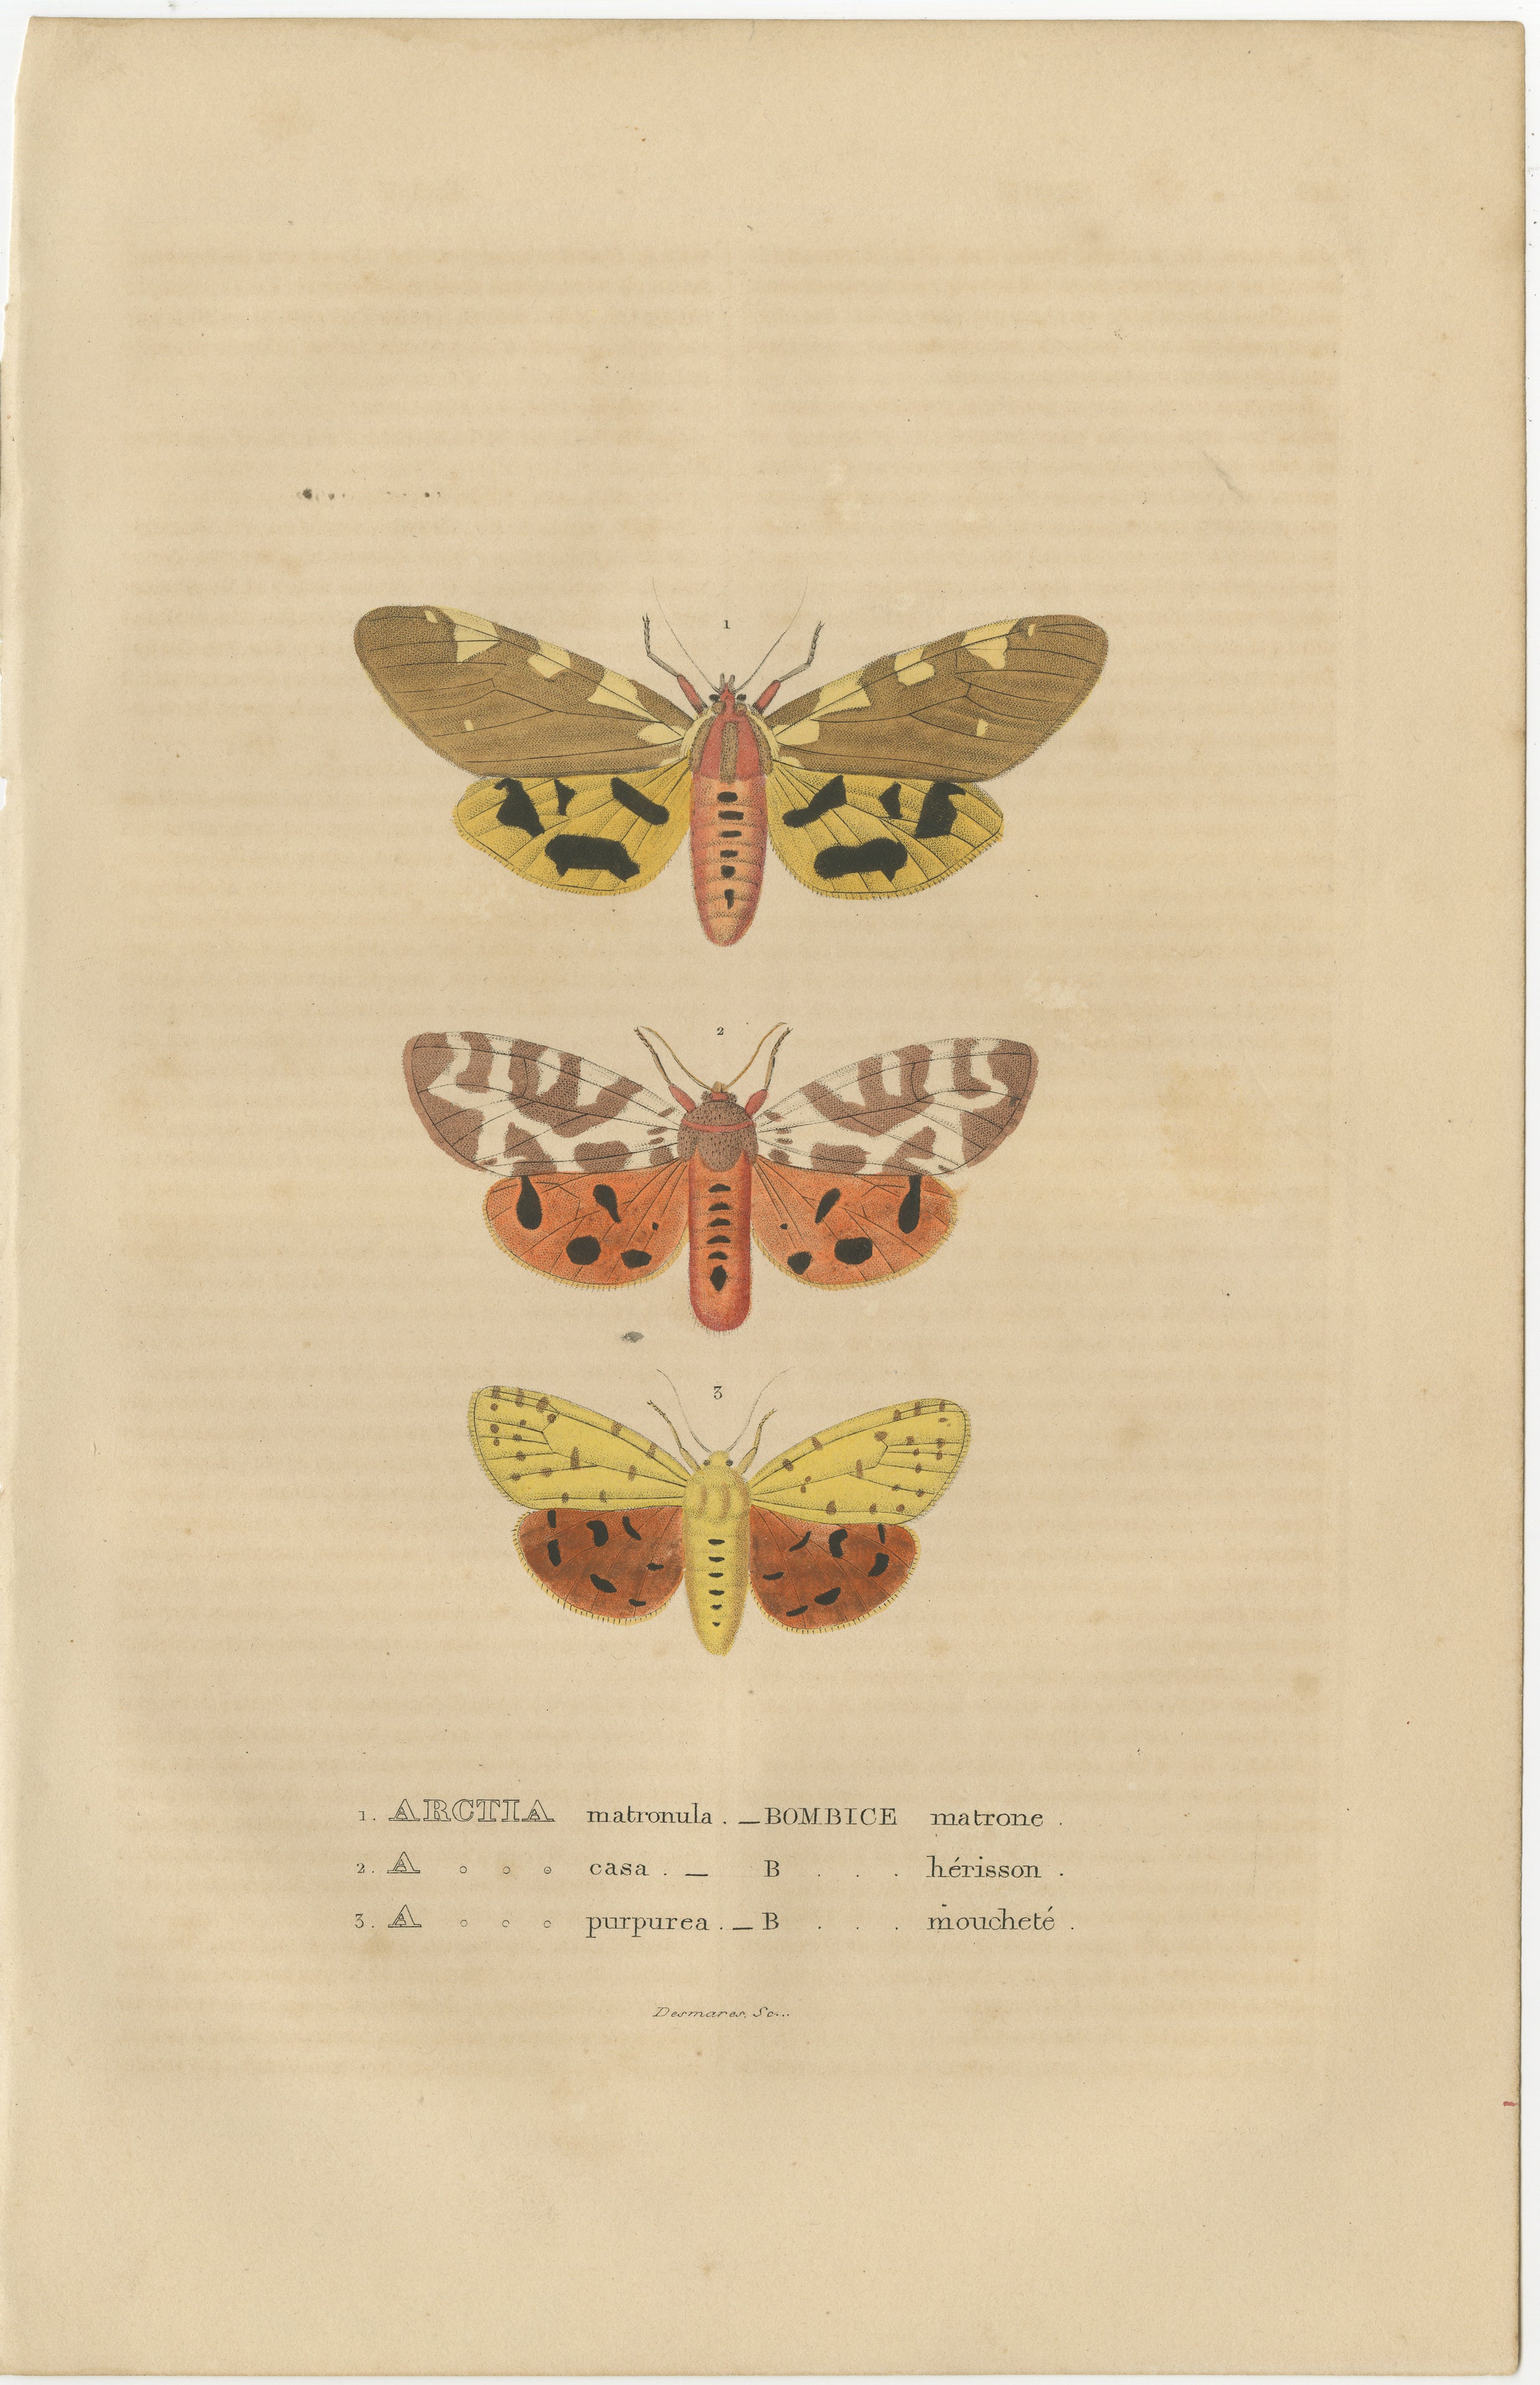 An original handcolored antique print featuring a series of illustrations of moths. Each moth is meticulously detailed, showcasing a variety of wing patterns and colors. The visual style is characteristic of 19th-century natural history